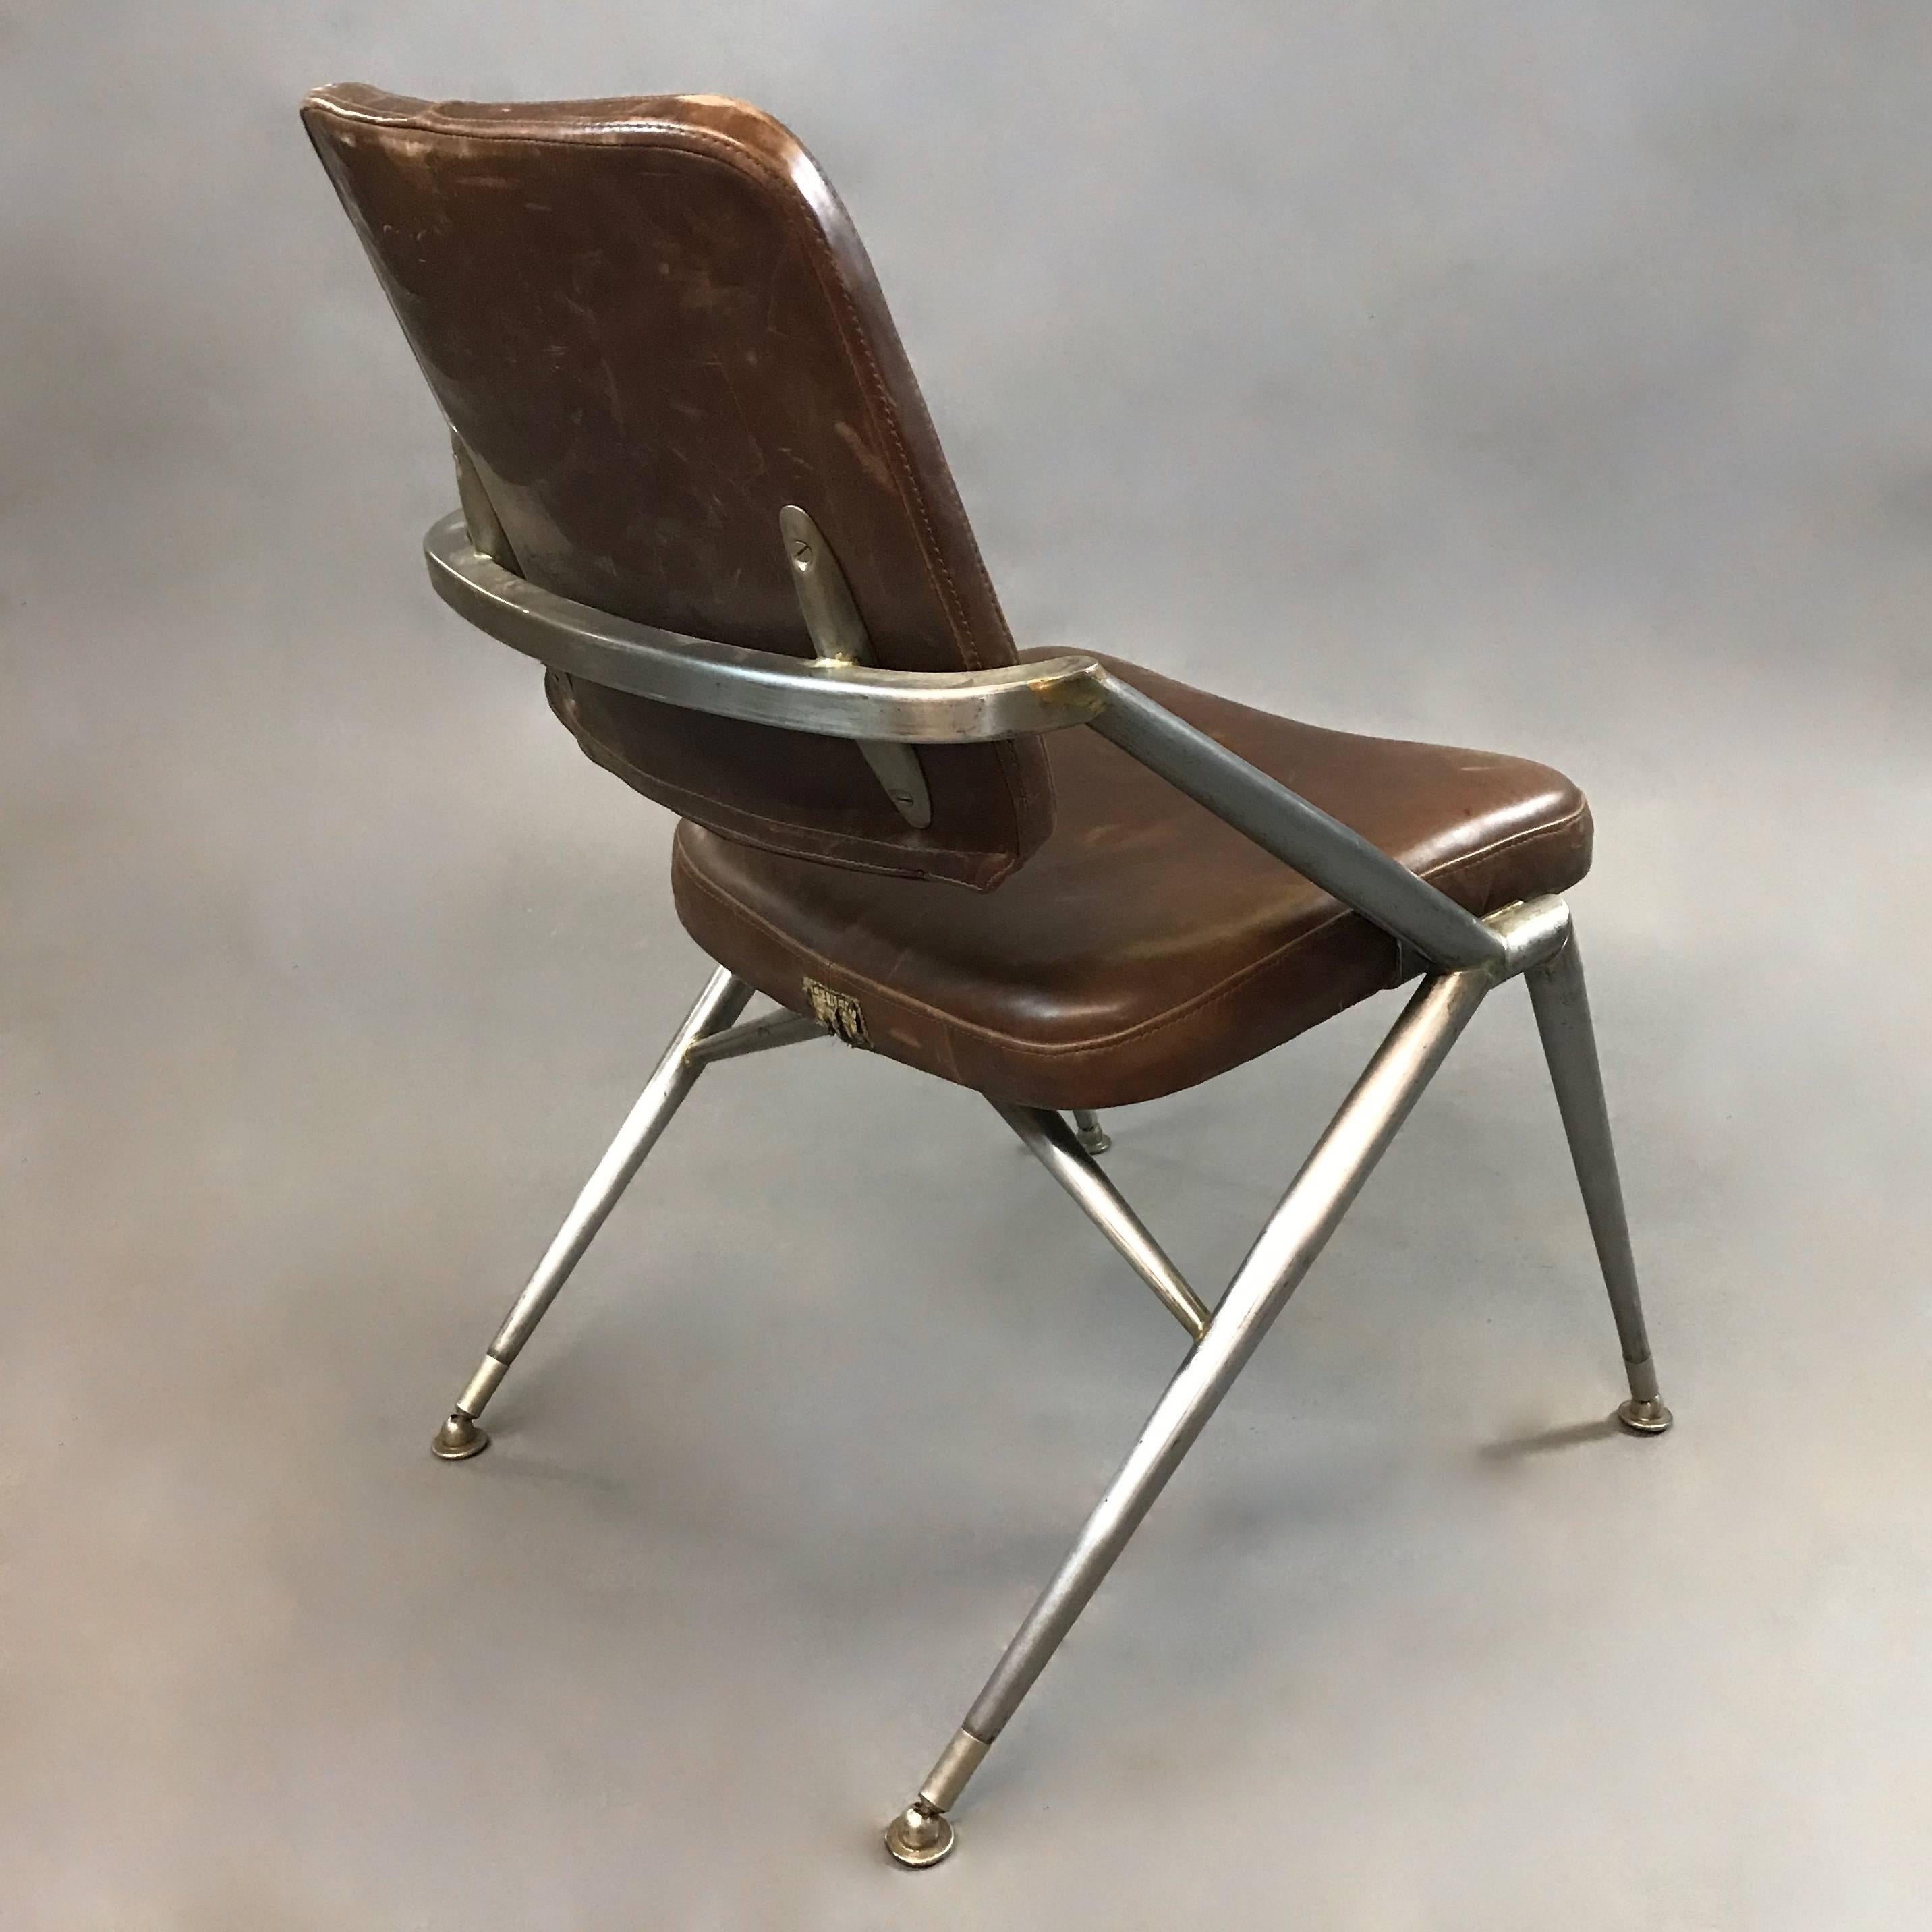 Midcentury Steel and Leather Office Chair by Cramer In Good Condition For Sale In Brooklyn, NY